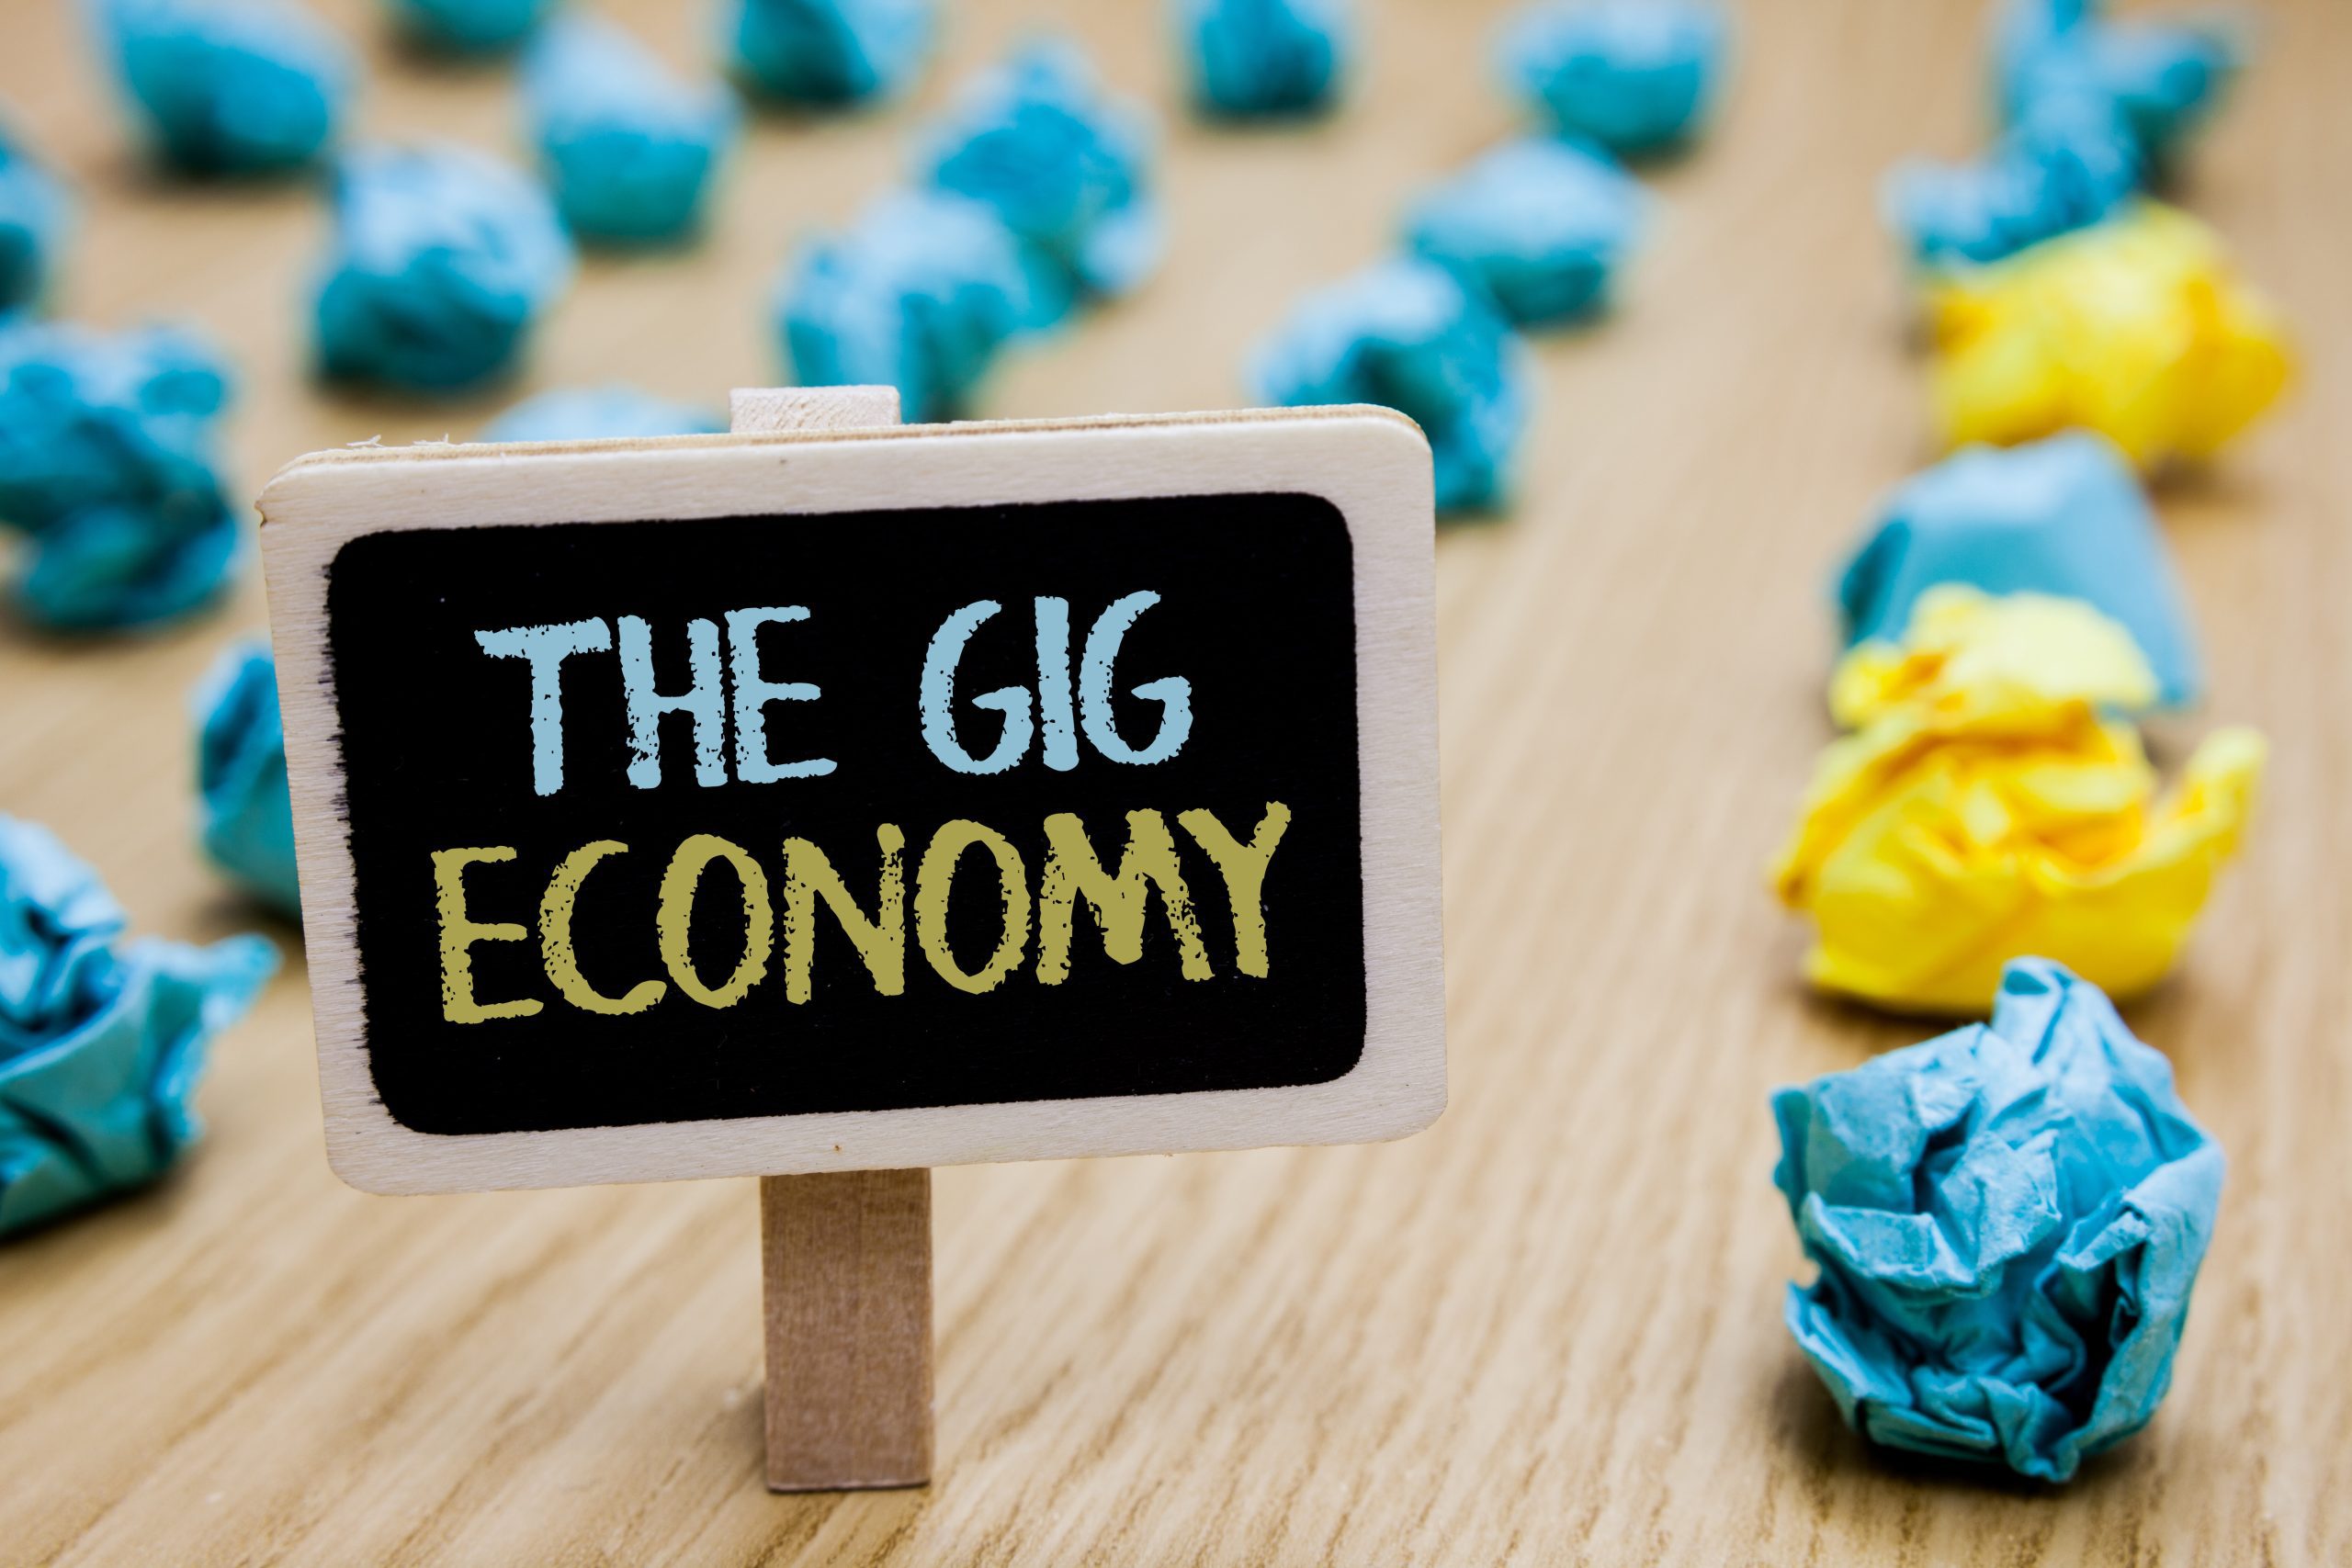 Protections for the Gig Economy